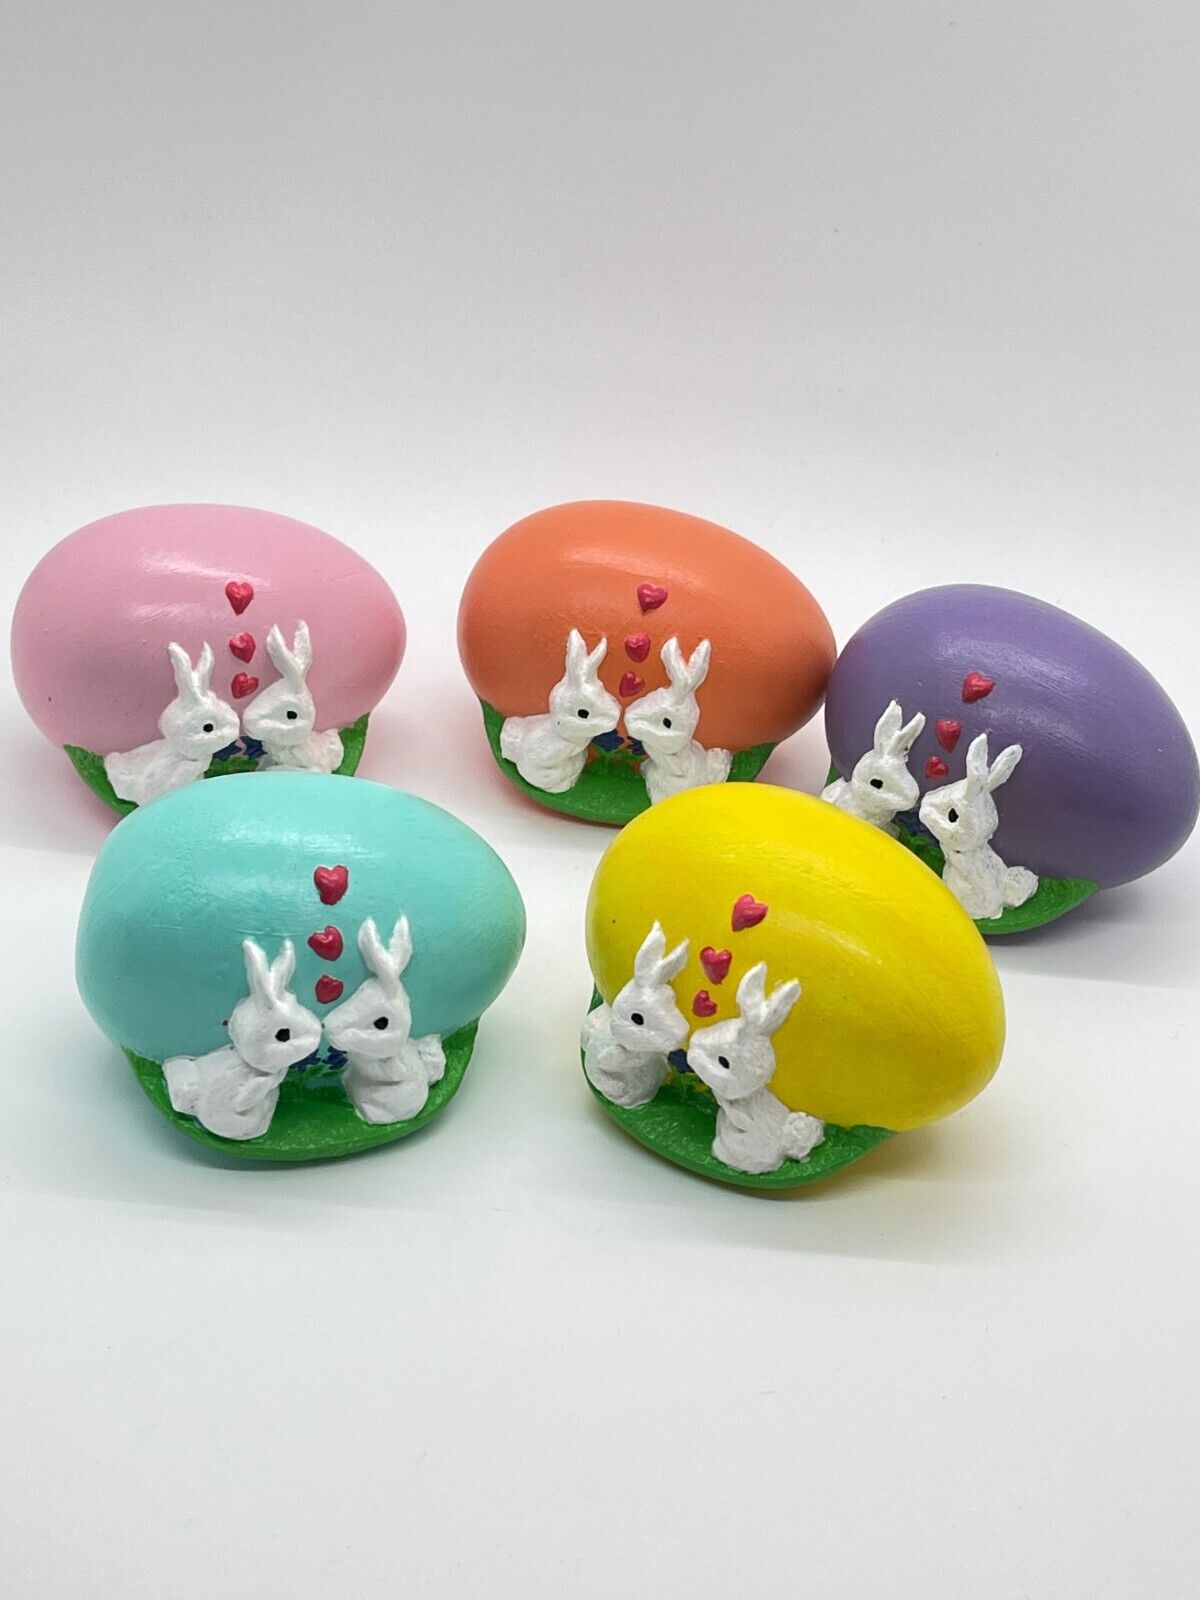 5 Bunnies In Love Hand Crafted Easter Eggs Decorative Figurines